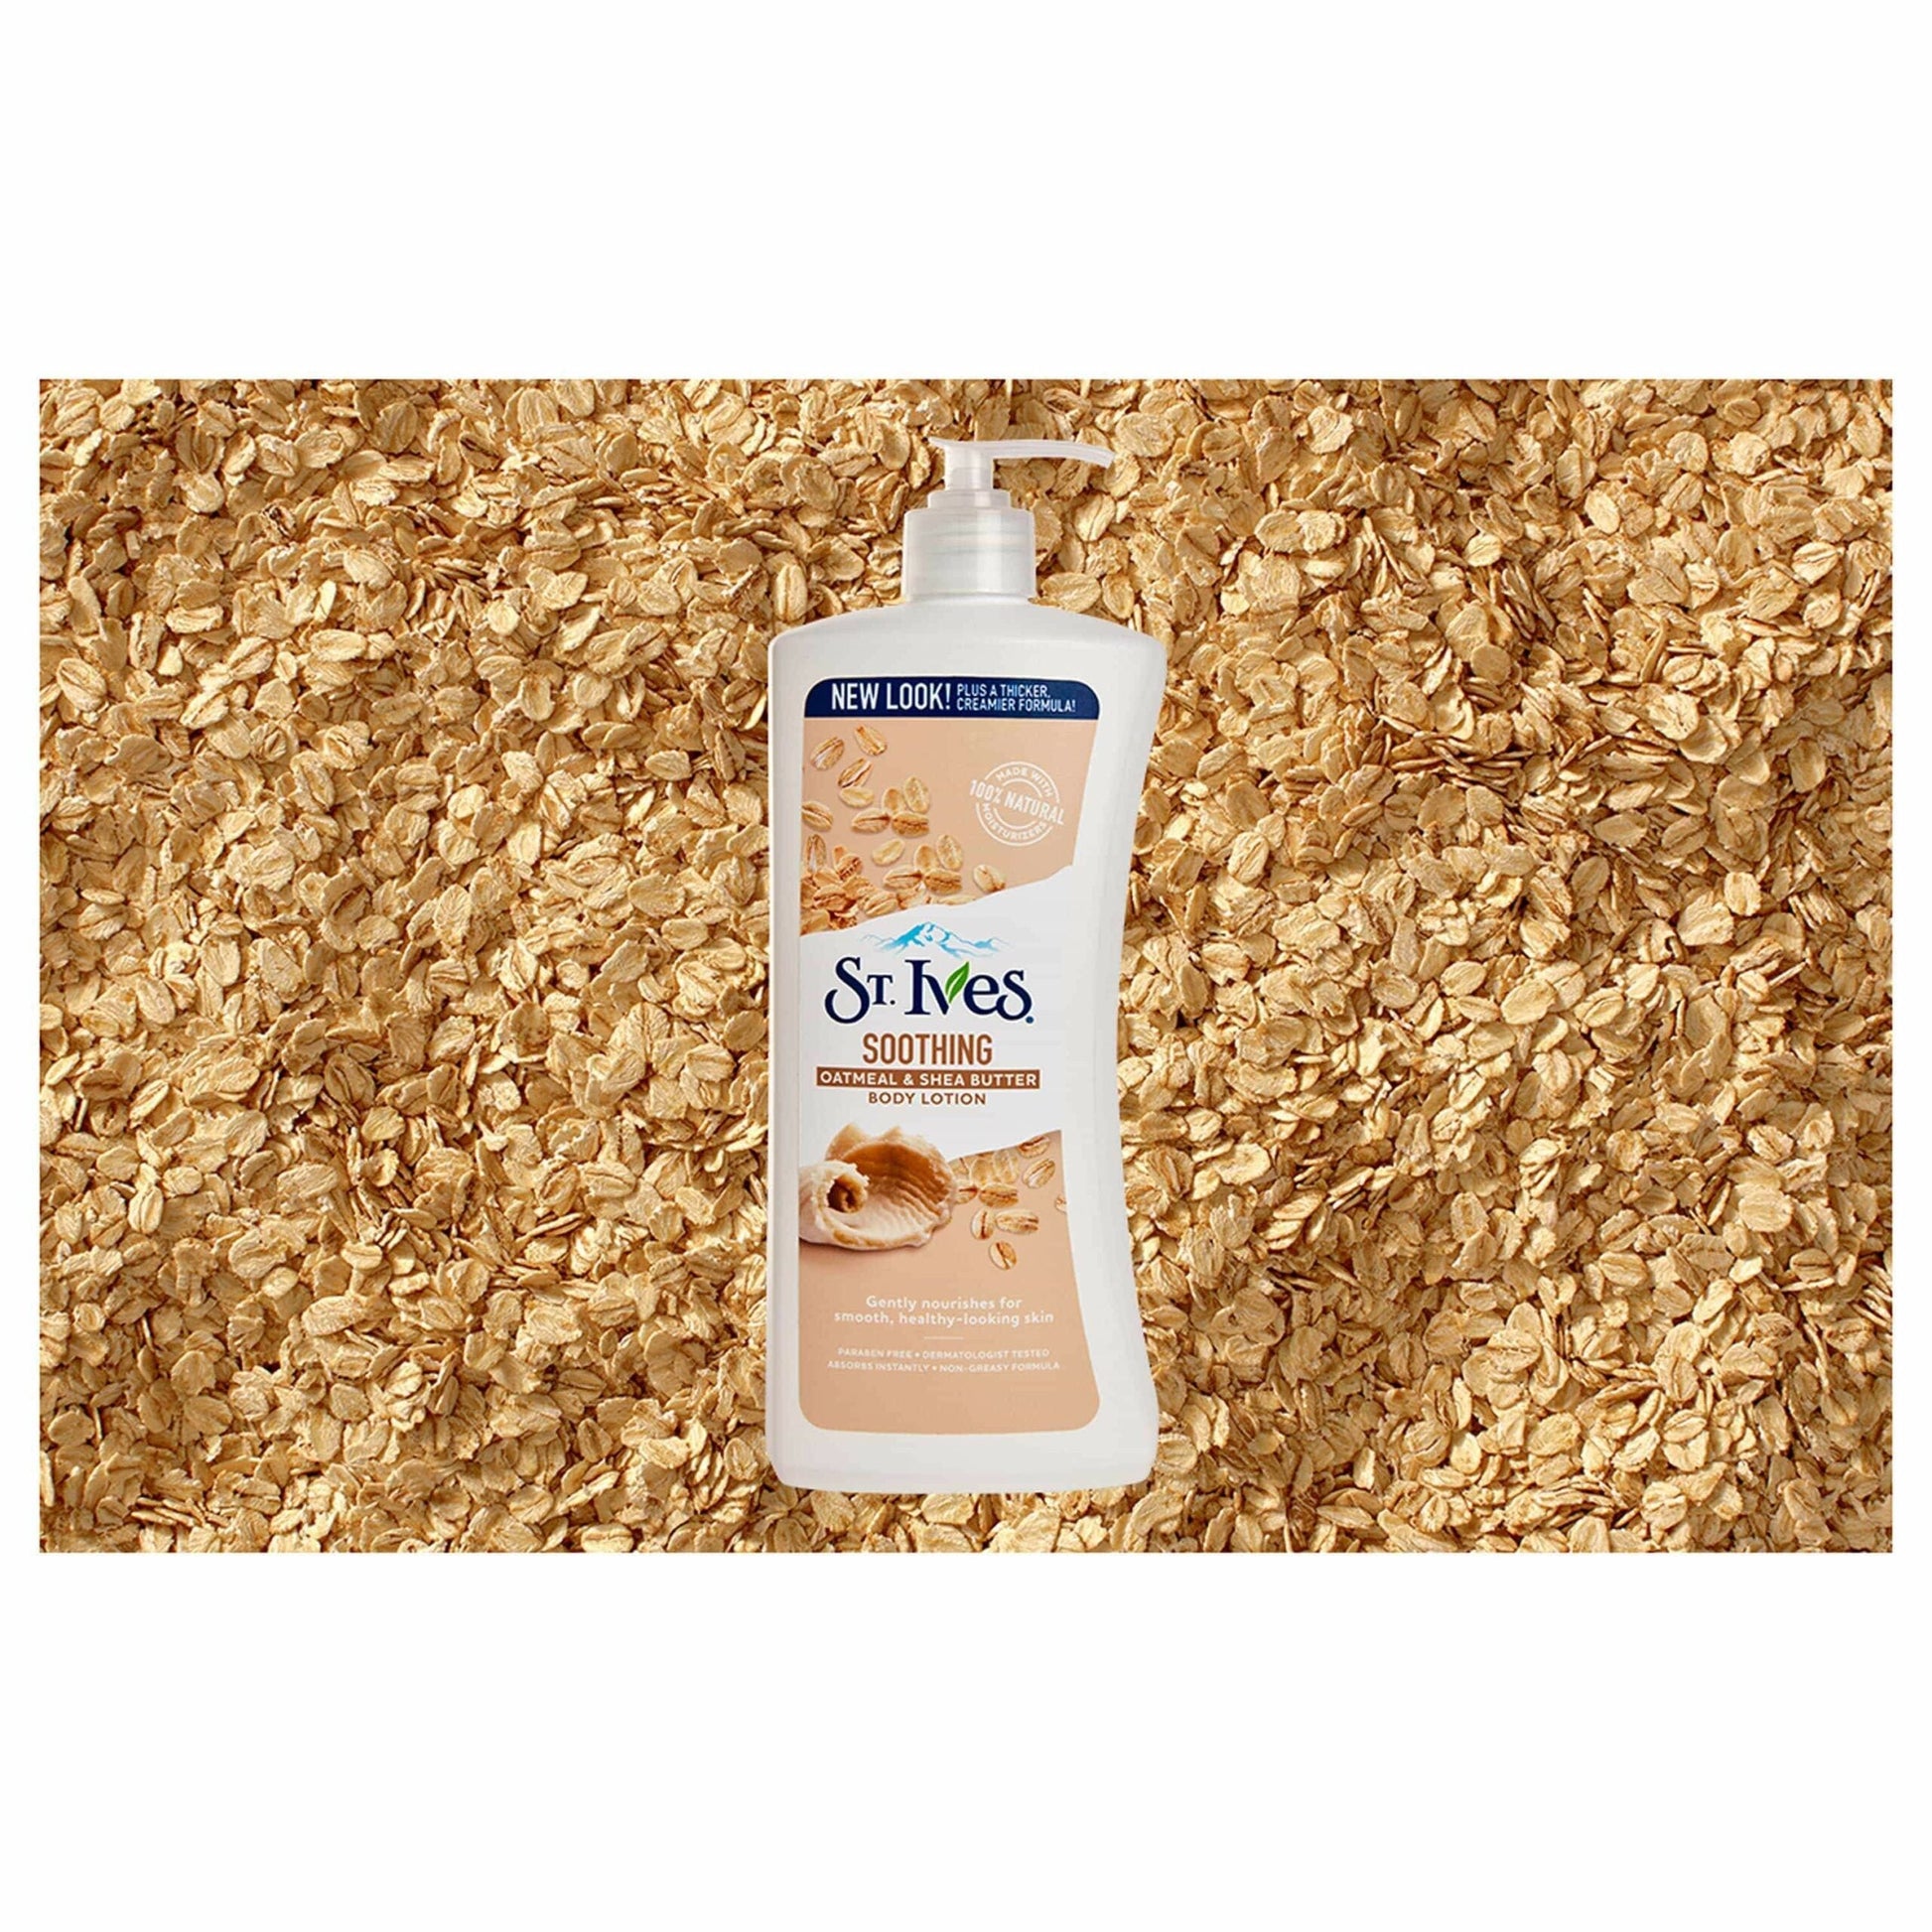 St. Ives Soothing Body Lotion, Oatmeal and Shea Butter Minoustore